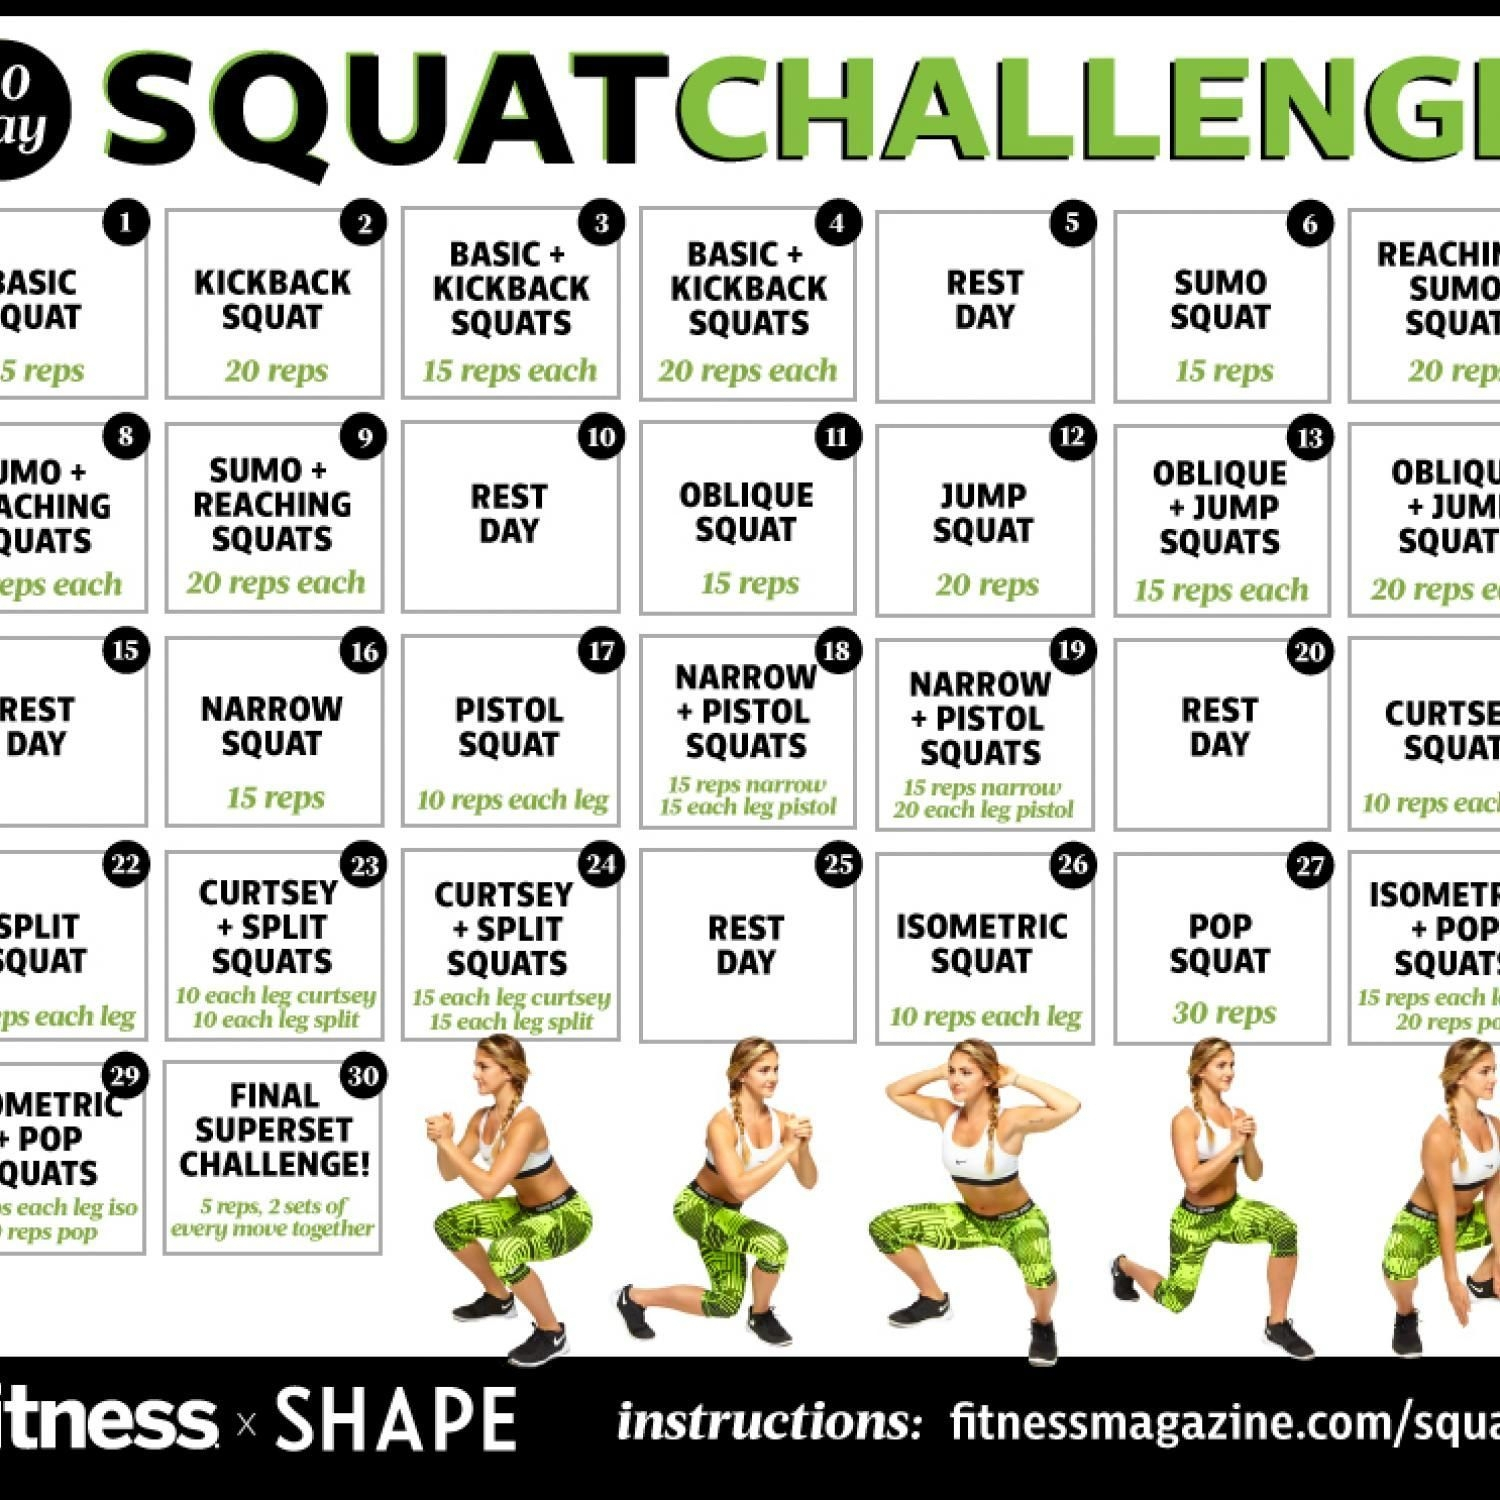 The 30 Day Squat Challenge Schedule Calendar | Get Your